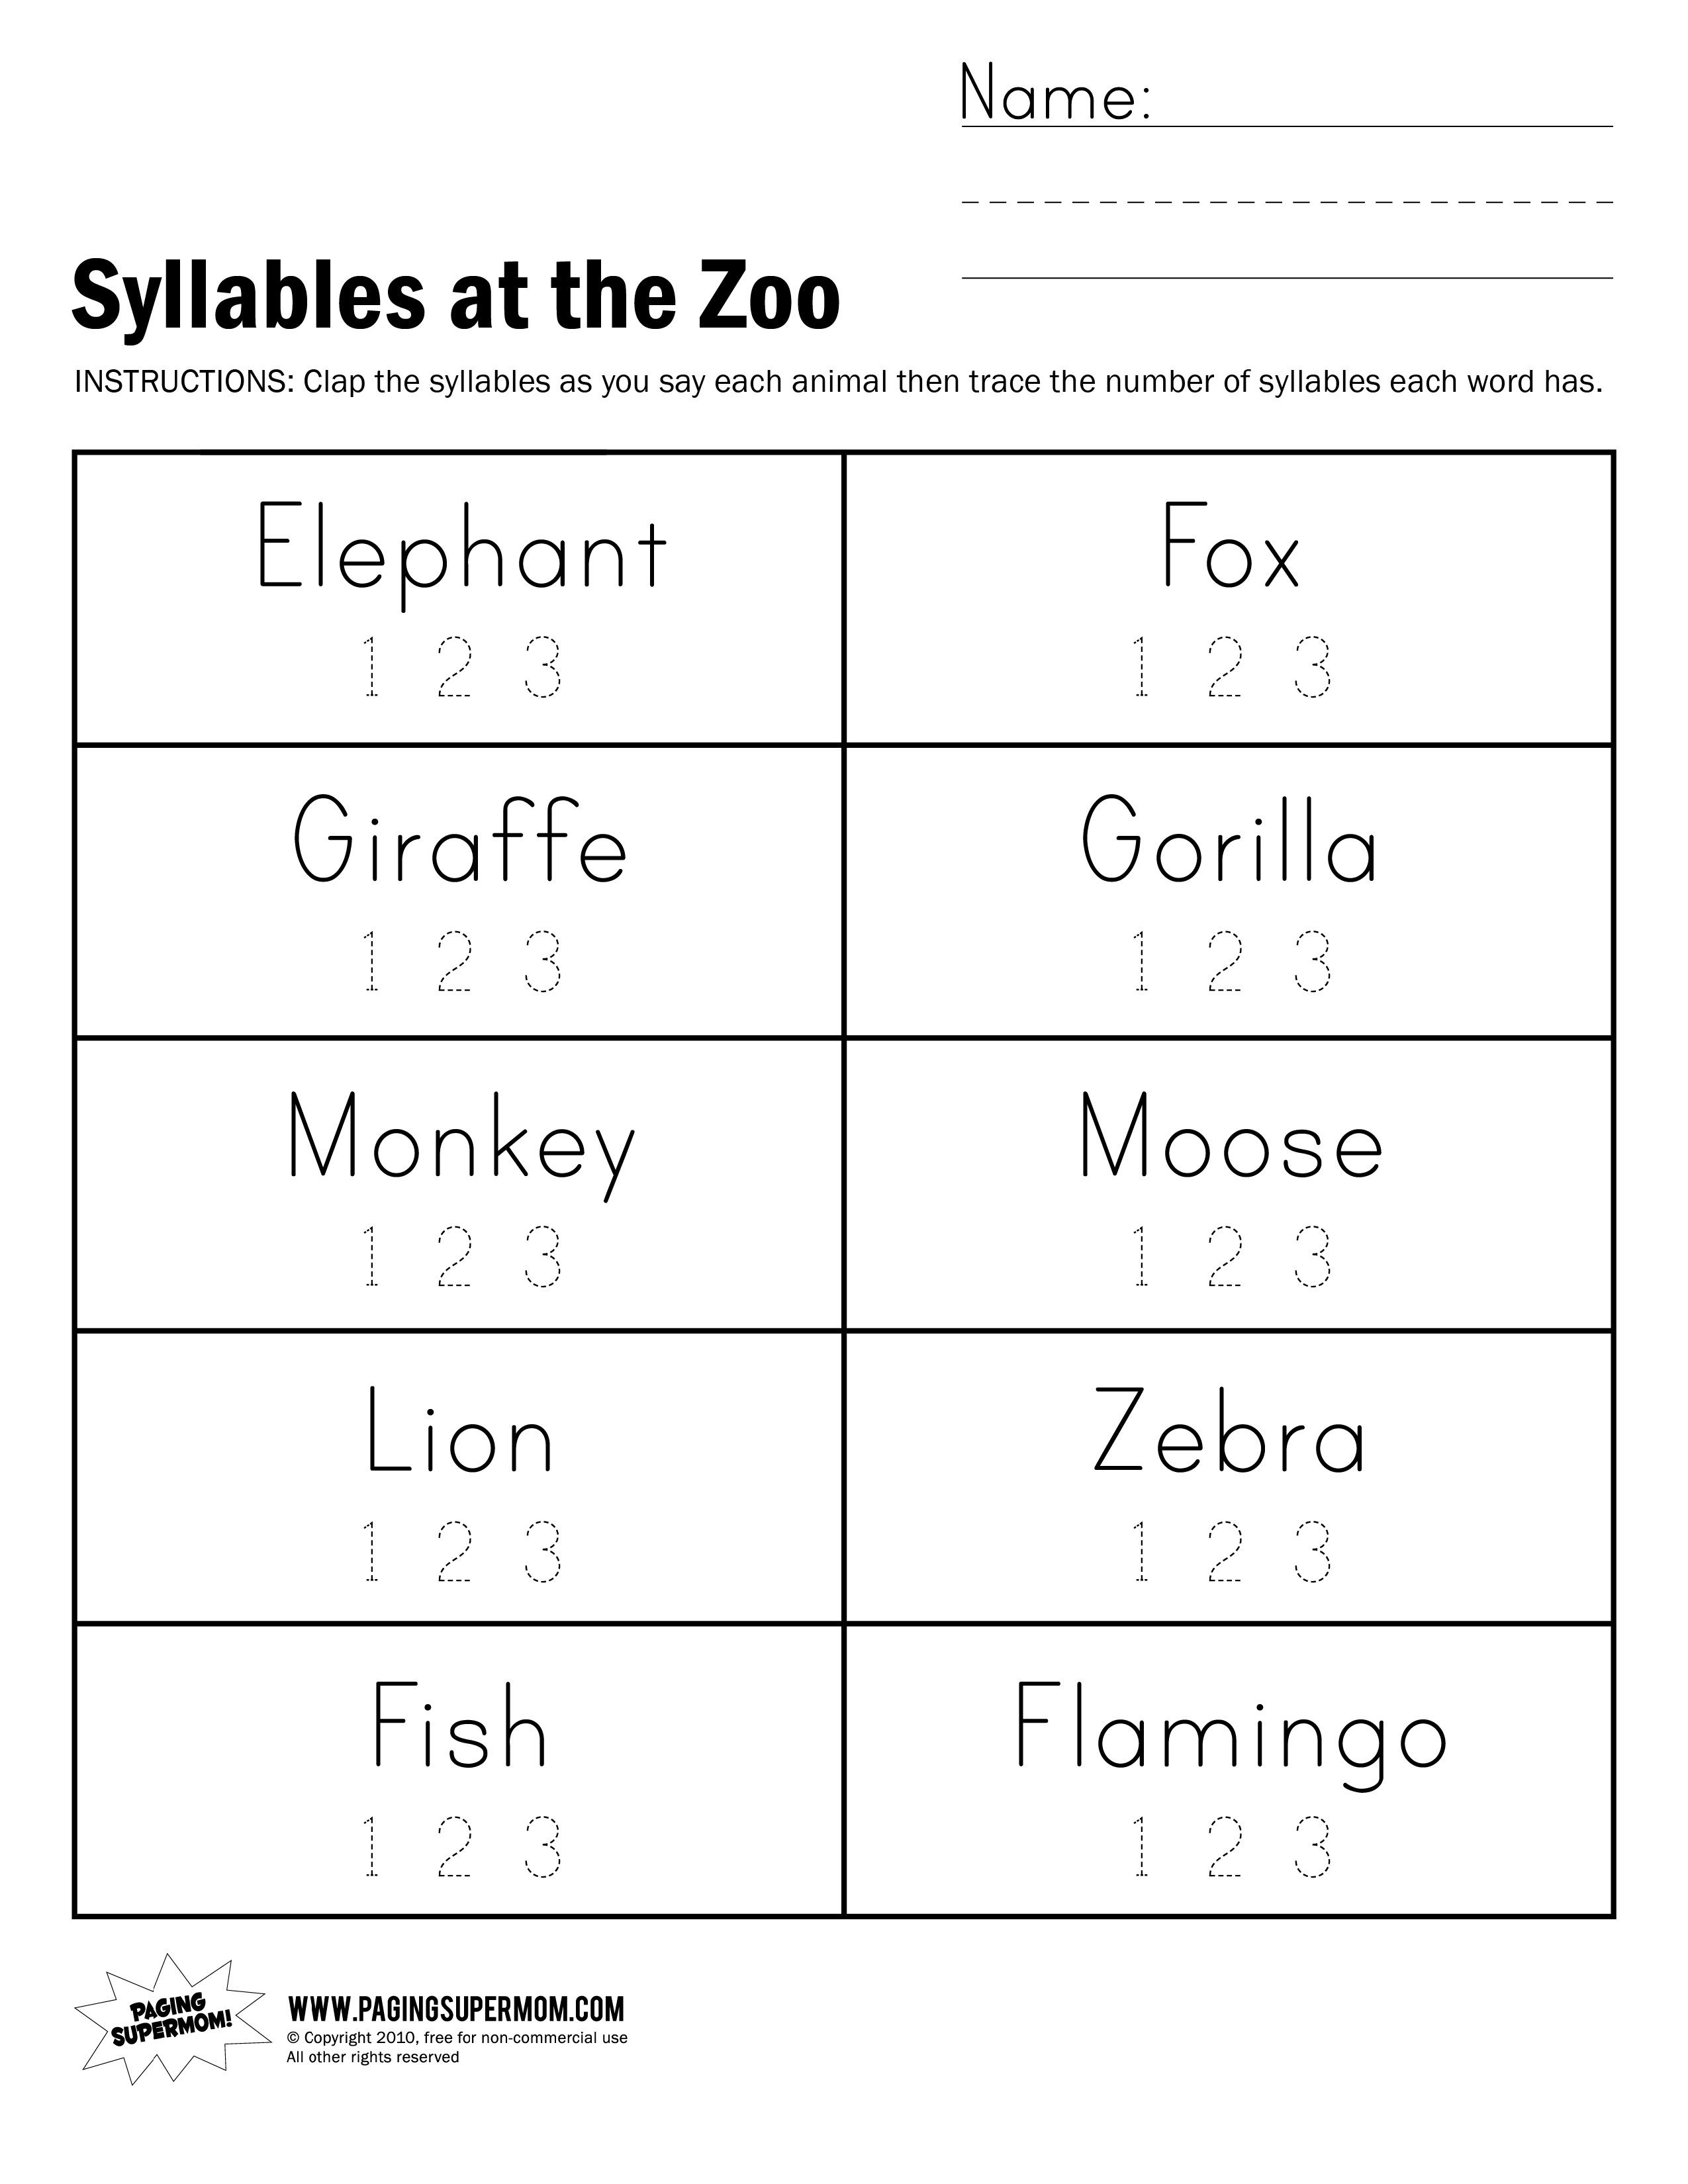 Syllables At The Zoo Worksheet | Paging Supermom | School Practice - Free Printable Open And Closed Syllable Worksheets